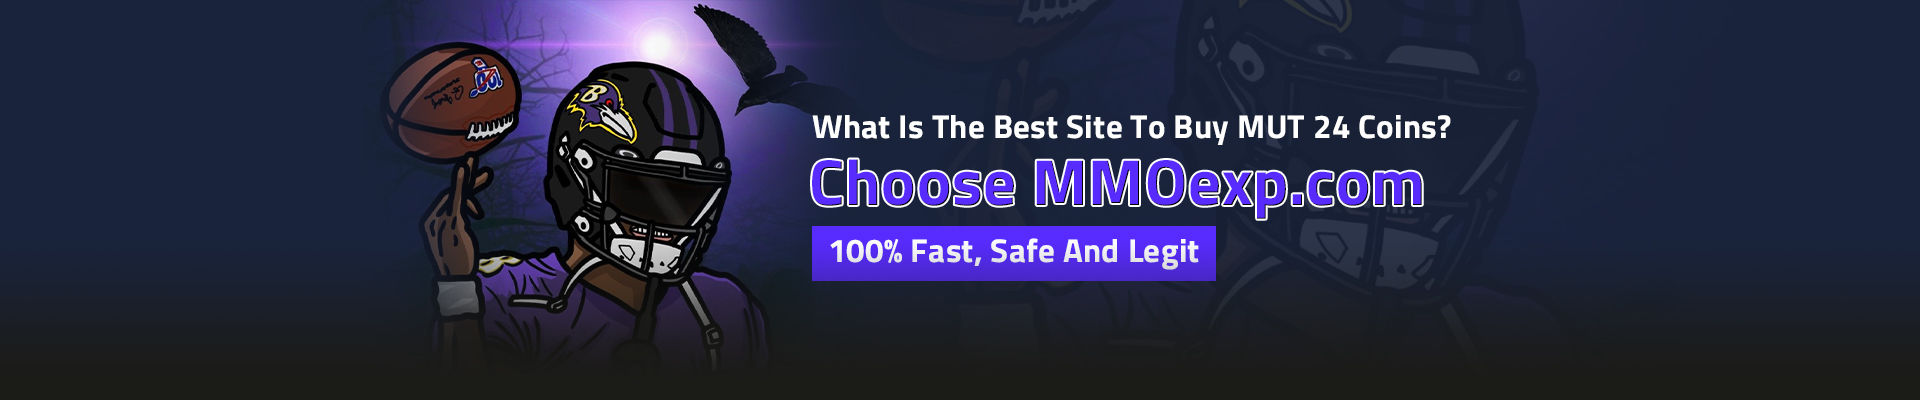 What Is The Best Site To Buy MUT 24 Coins? Choose 